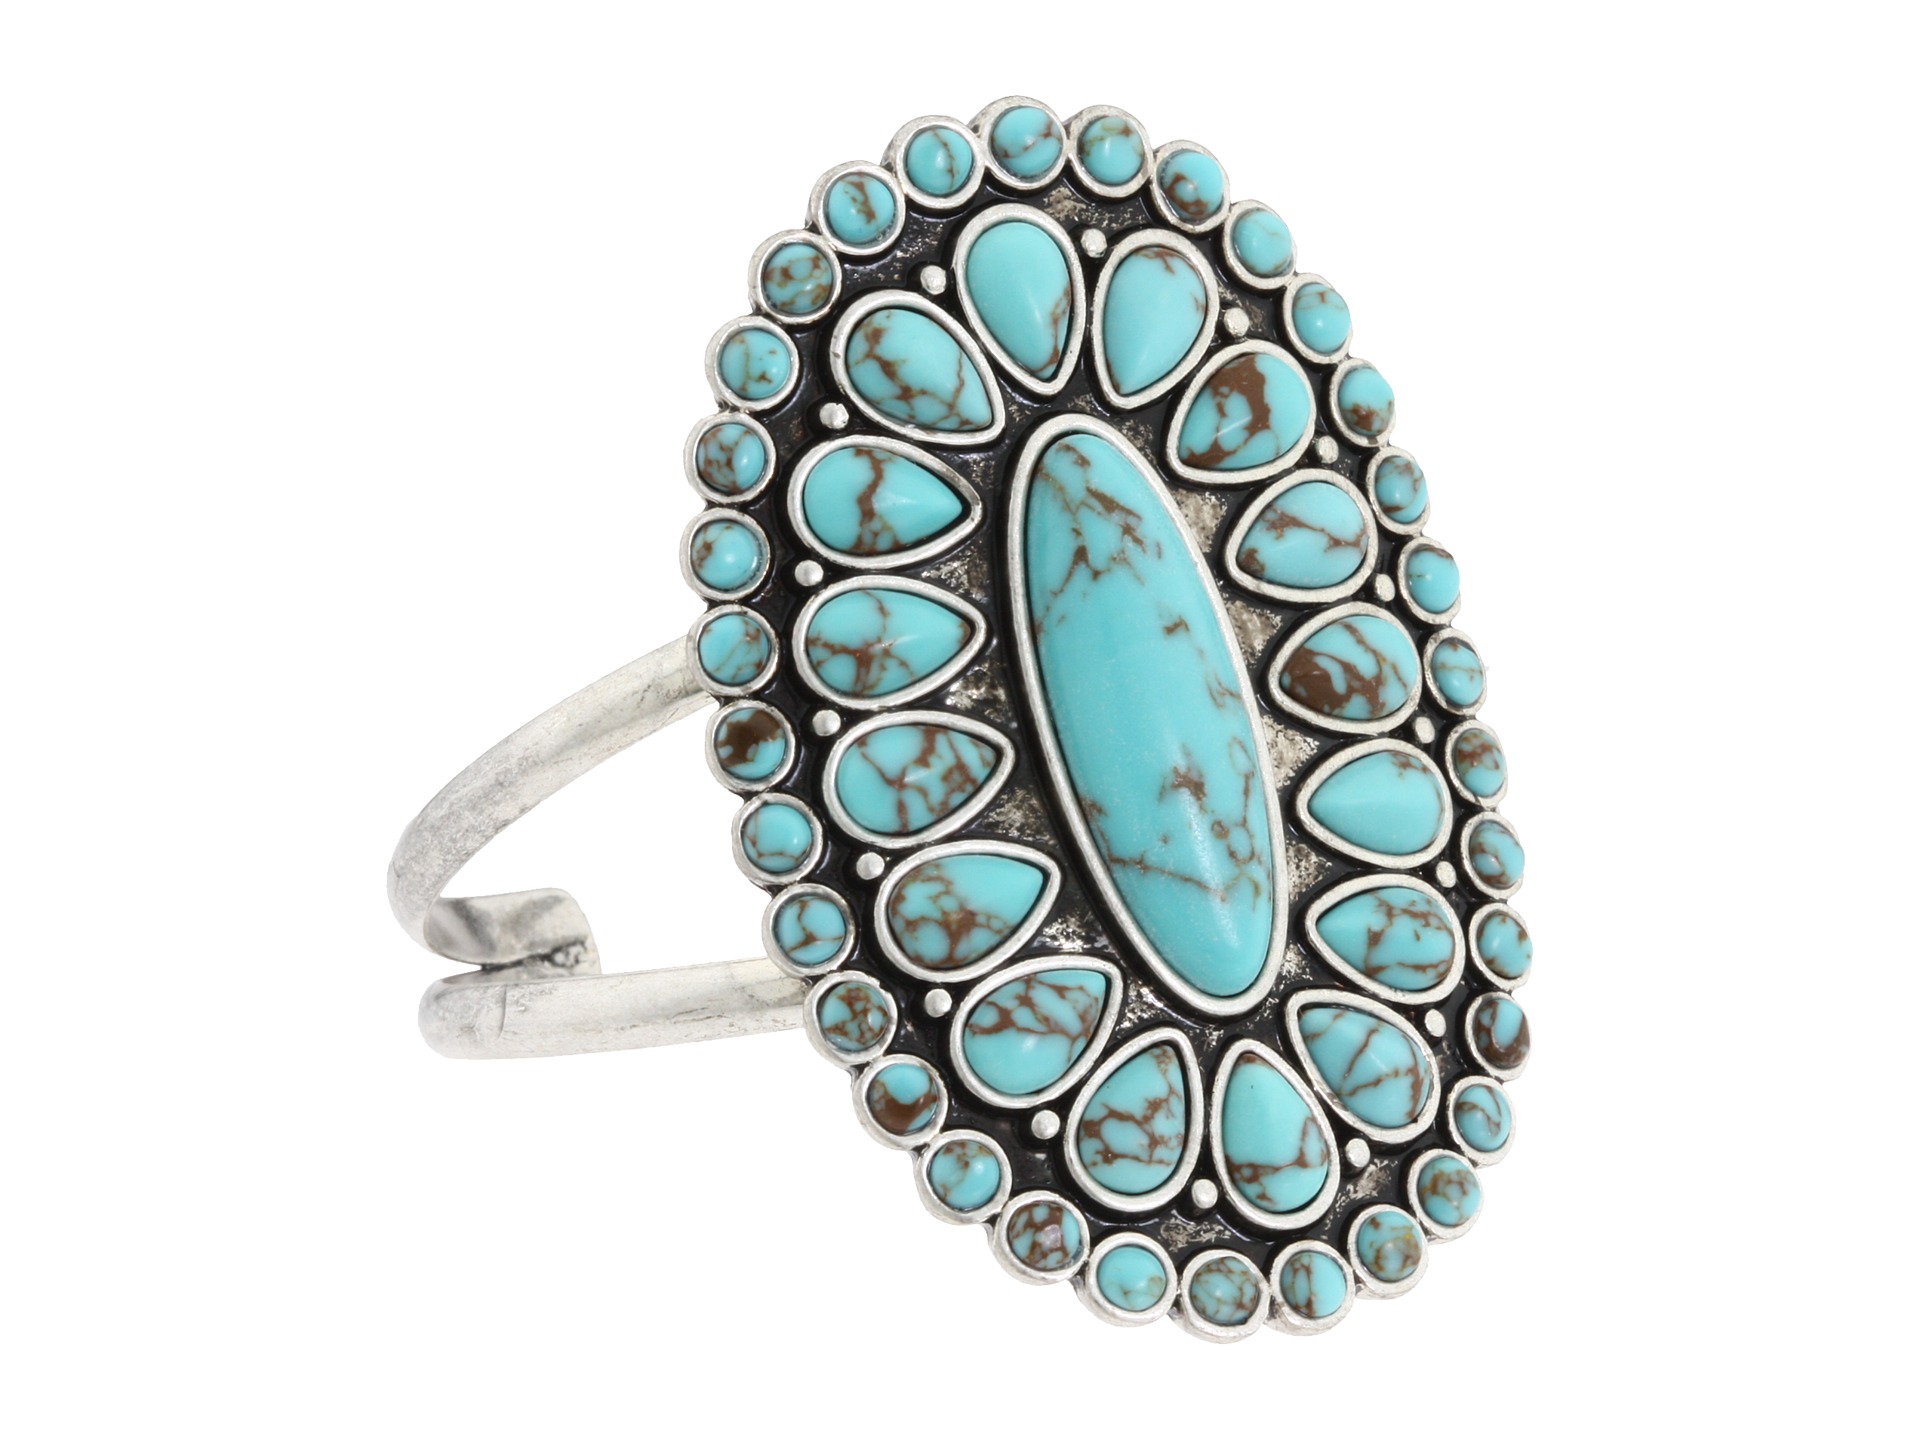 Lucky Brand   Turquoise Set Stone Cuff